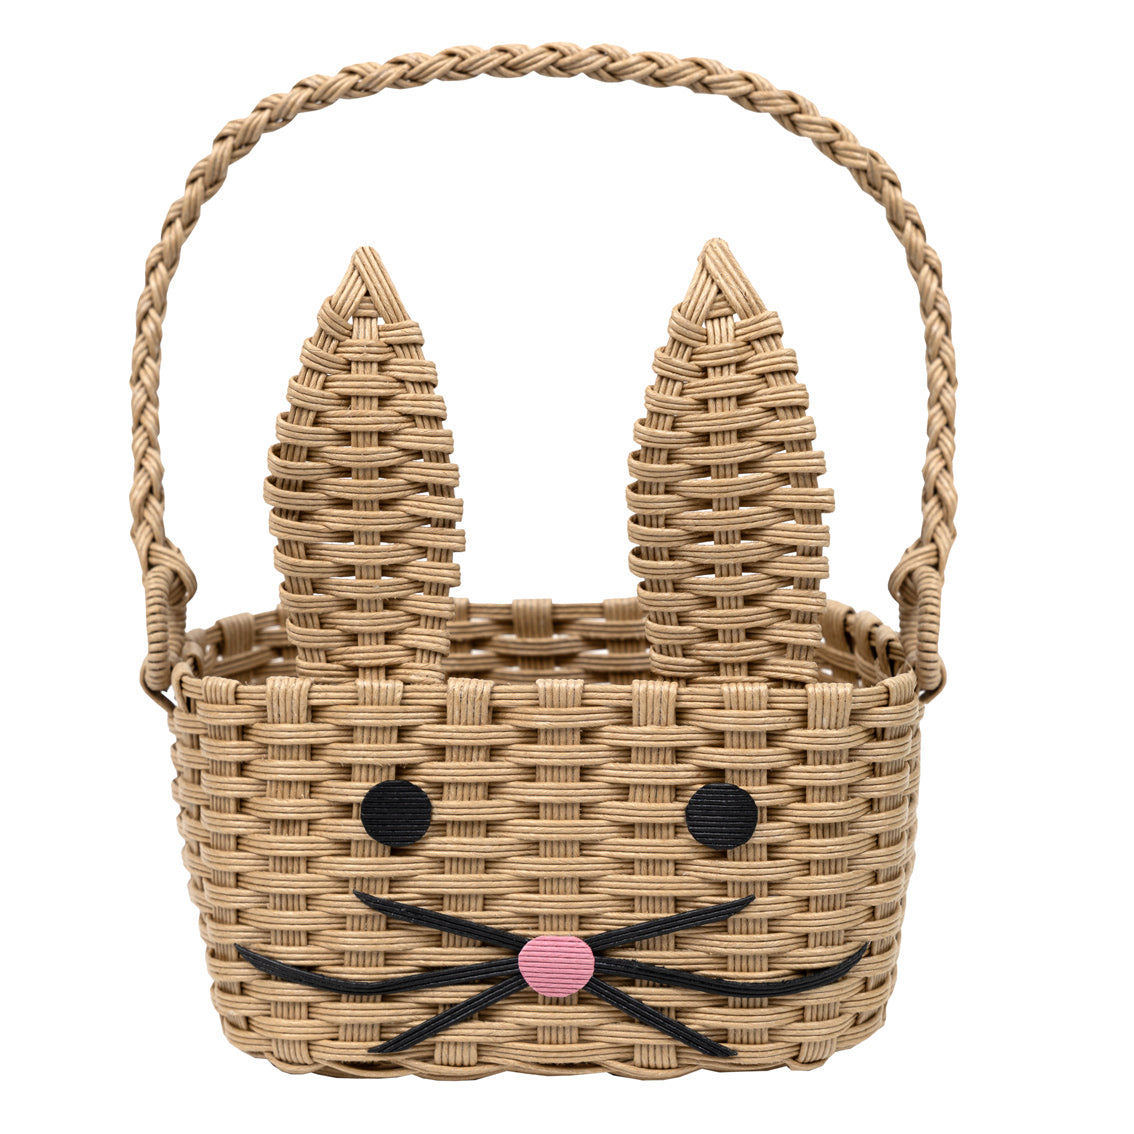 Bunny Shaped Woven Basket by penny black